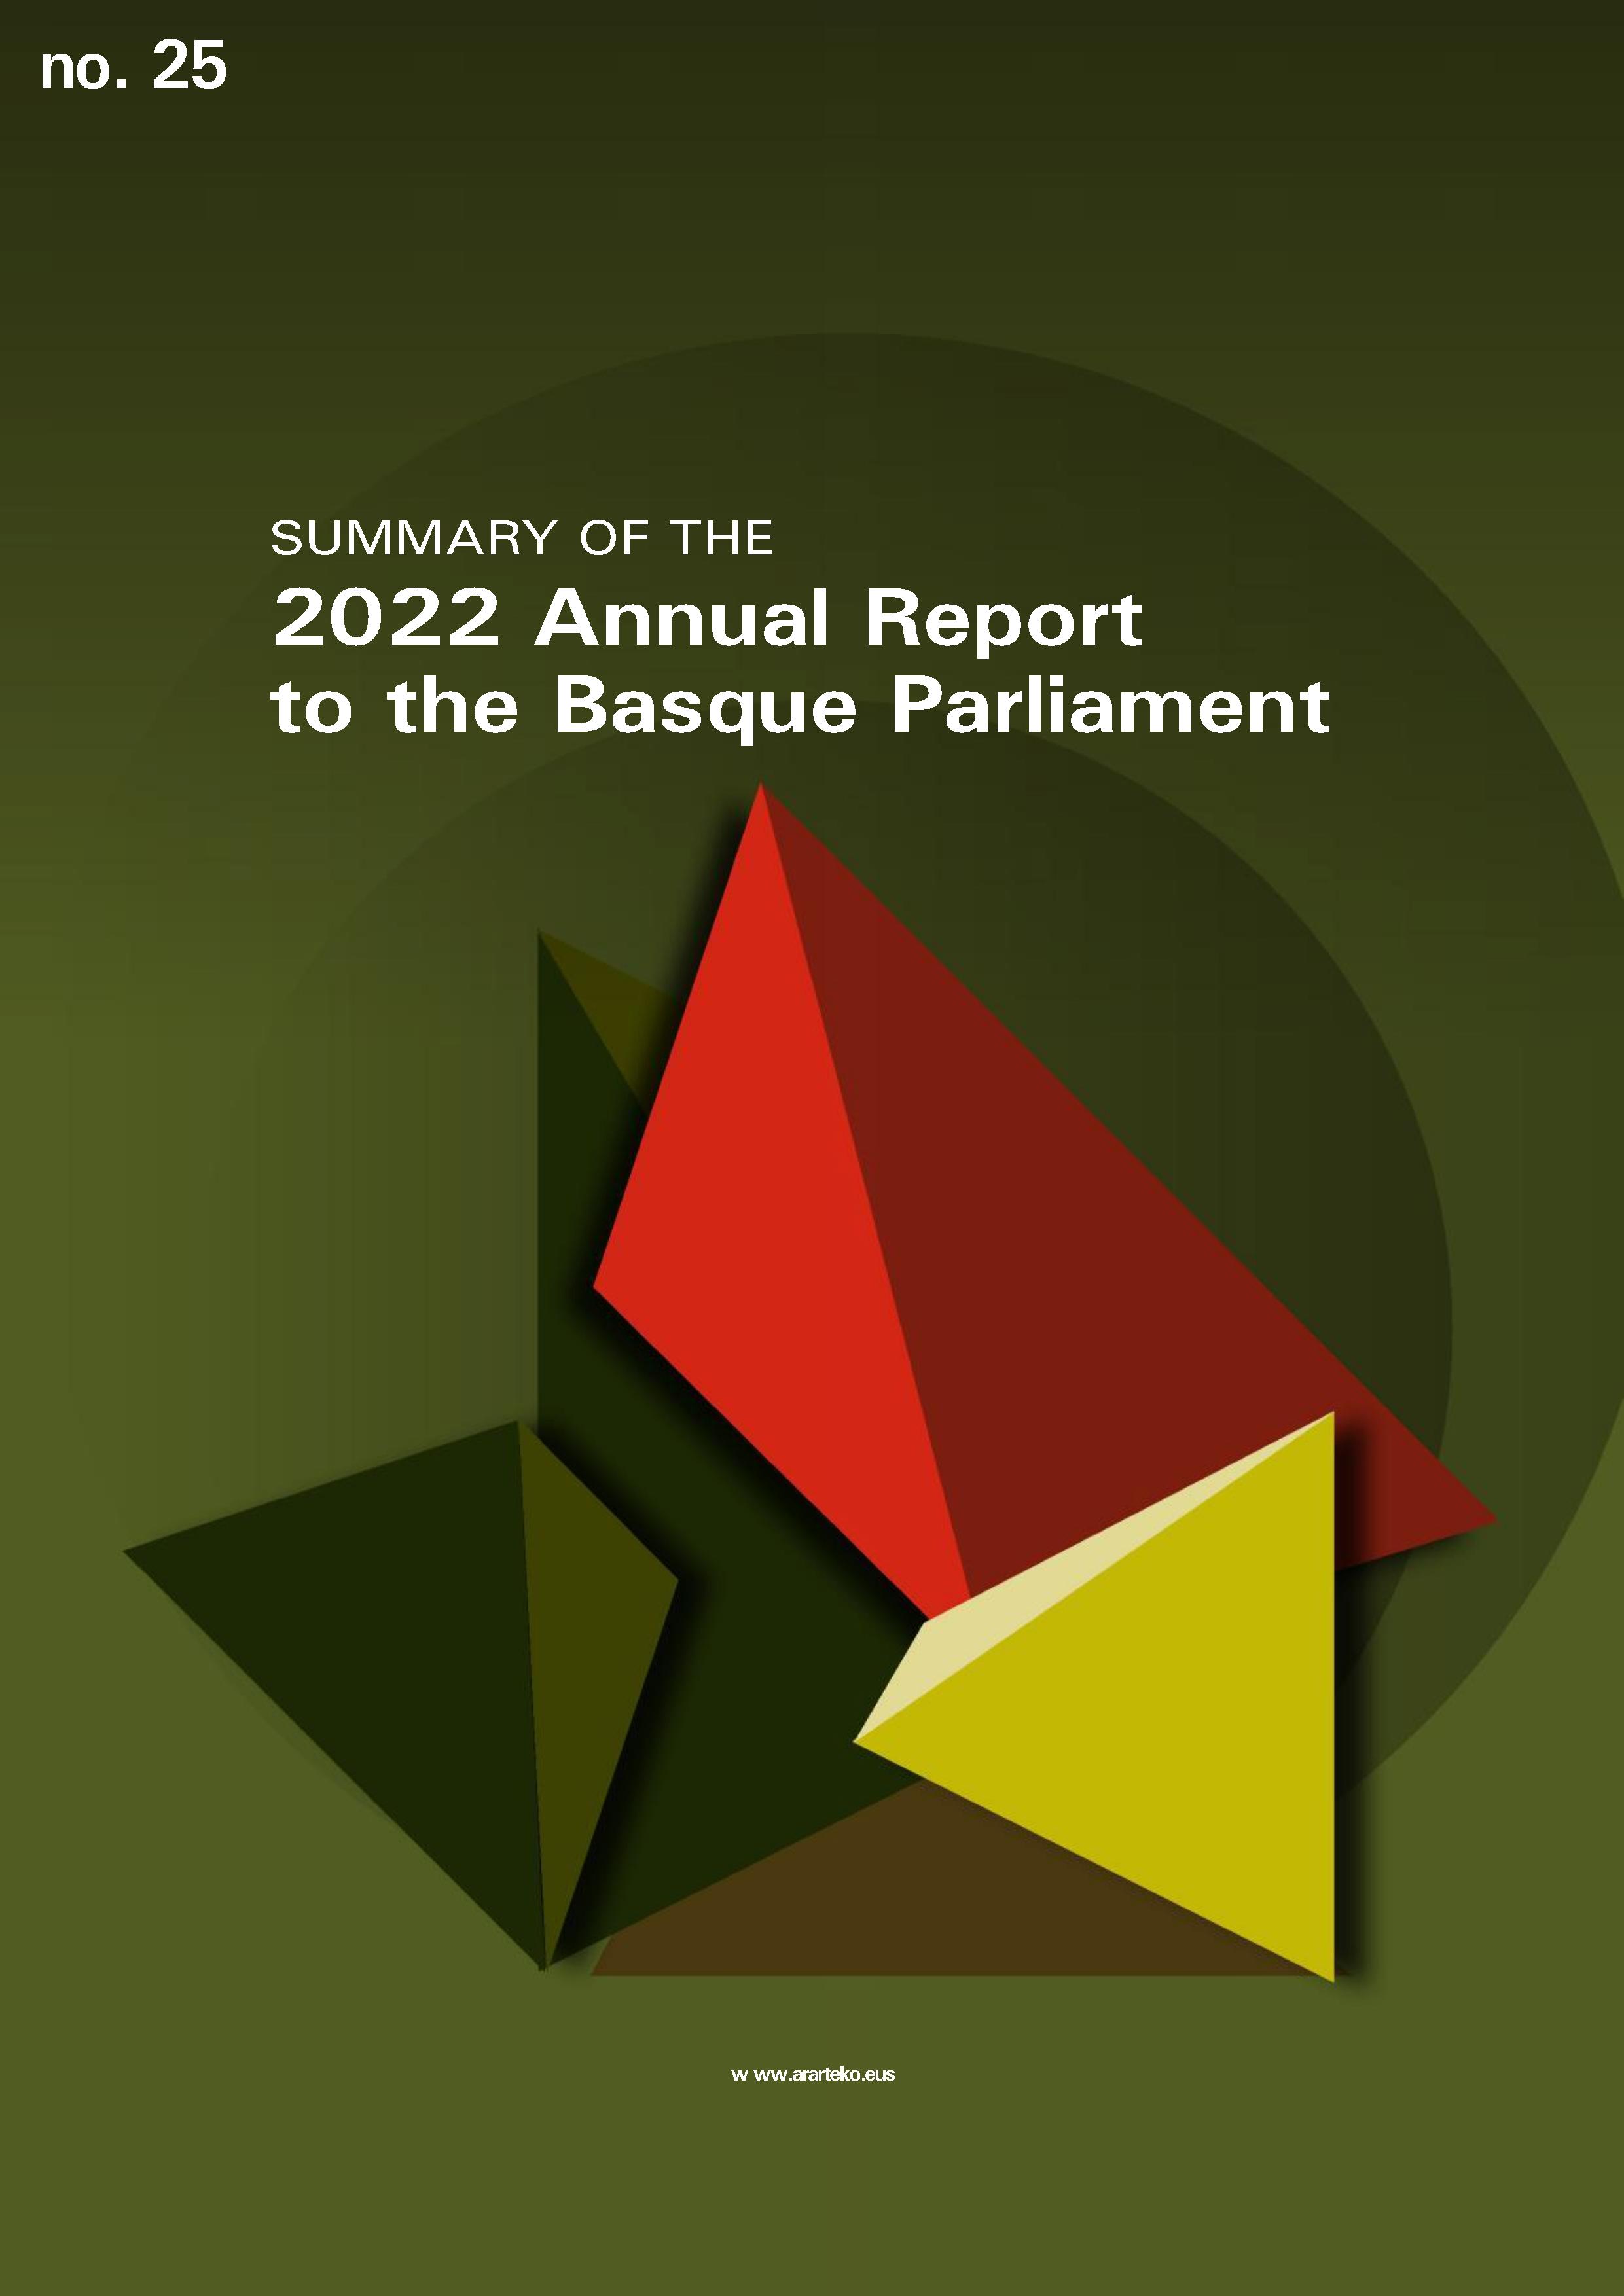 Summary of the Annual Report to the Basque Parliament 2022